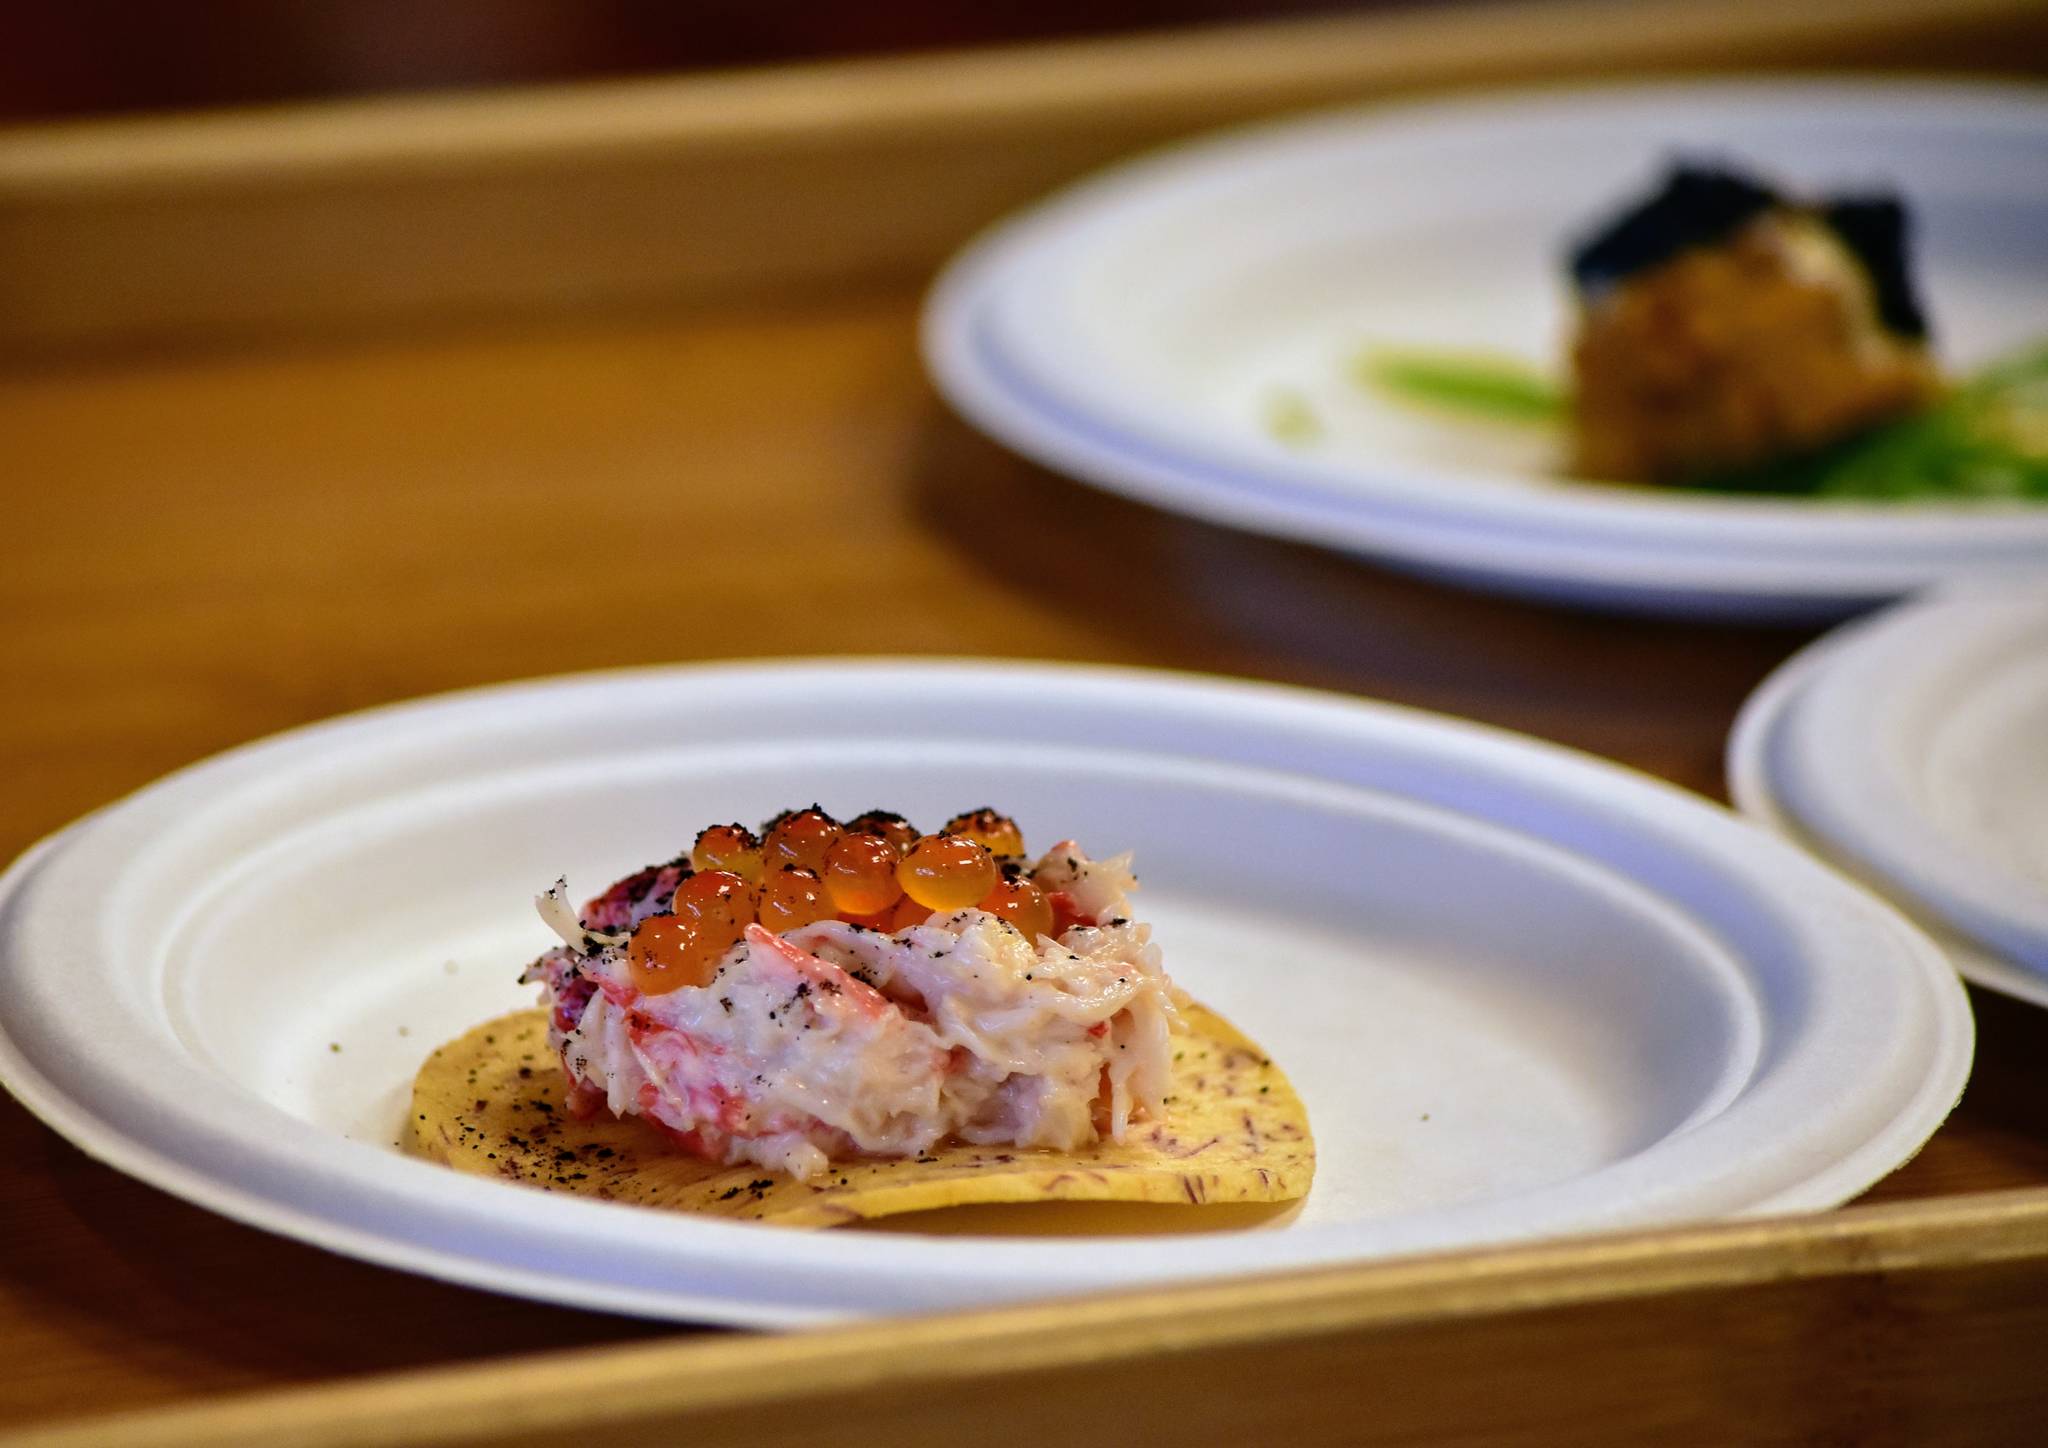 Alaskan king crab with seaweed, vanilla, salmon roe, crispy taro chip served at a charity dinner highlighting Alaska and Louisiana seafood at Forbbiden Peak Brewery on Tuesday, June 8, 2021. (Peter Segall / Juneau Empire)